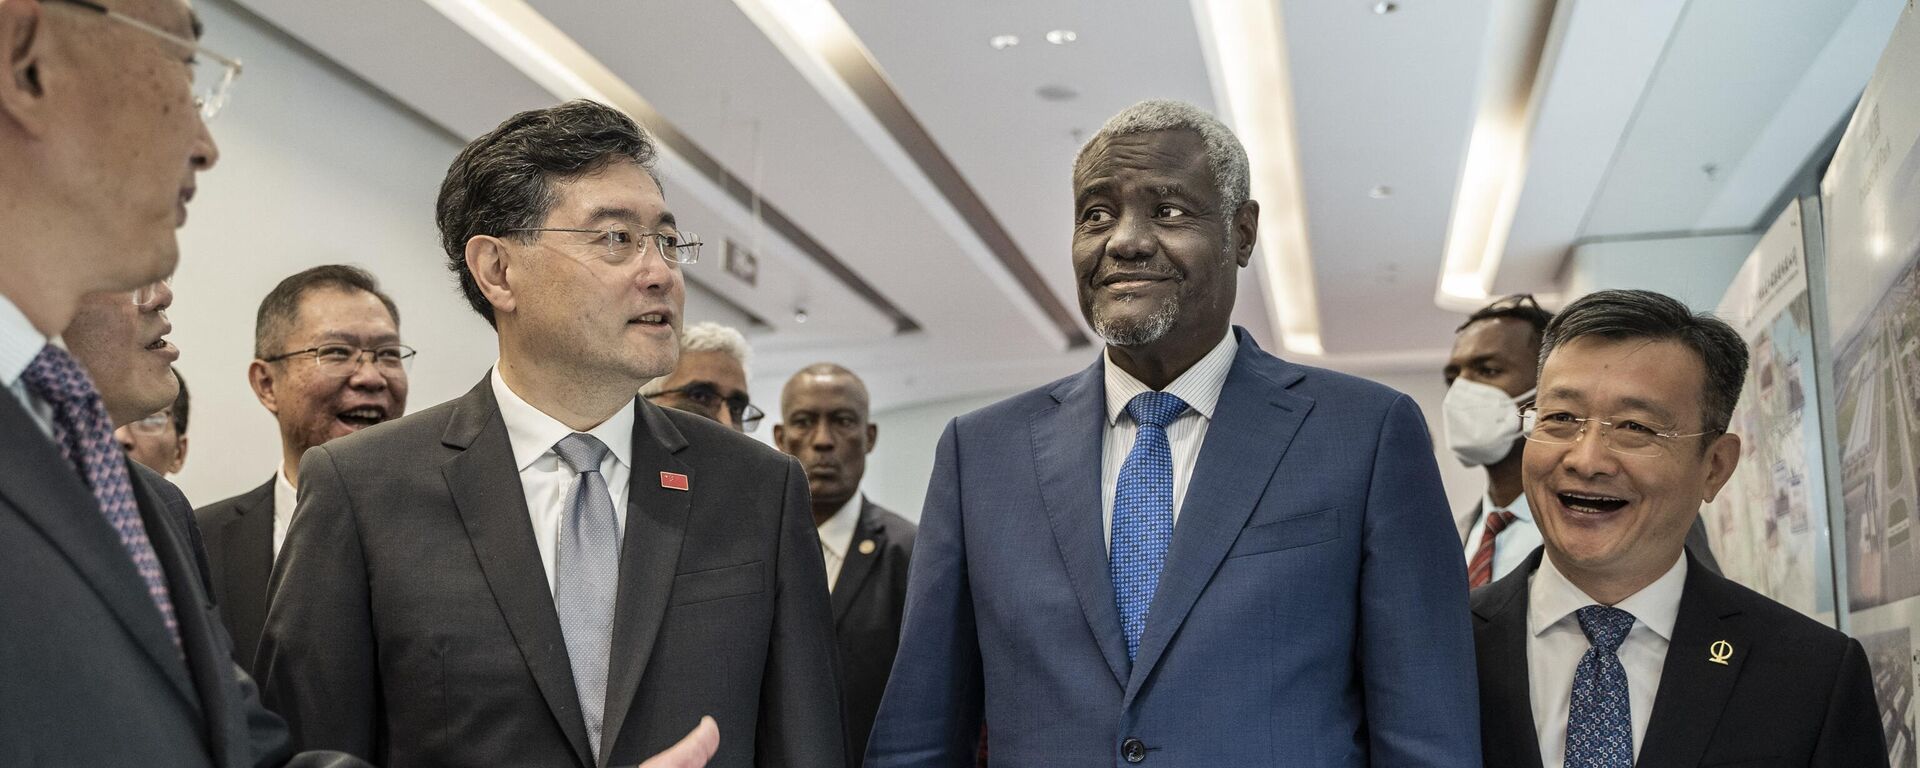 China's Foreign Minister Qin Gang (2nd L) and Moussa Faki (2nd R), Chairperson of the African Union (AU) Commission, tour the building of African CDC (Centers for Disease Control) headquarters during the inauguration ceremony in Addis Ababa, Ethiopia, on January 11, 2023. - Sputnik International, 1920, 12.01.2023